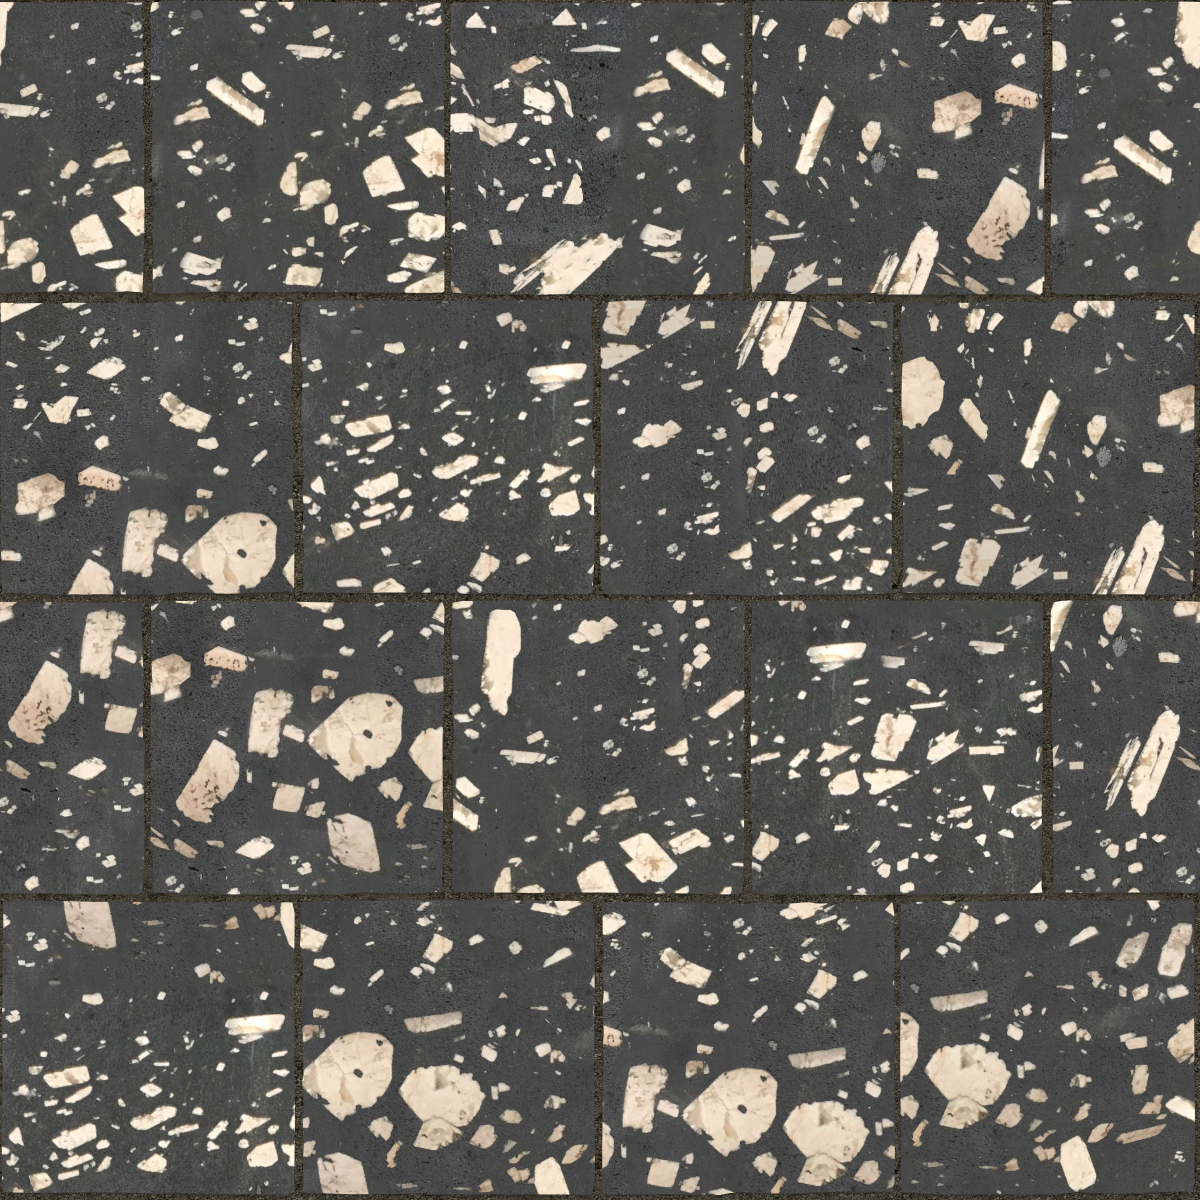 A seamless stone texture with andesite porphyry blocks arranged in a Stretcher pattern